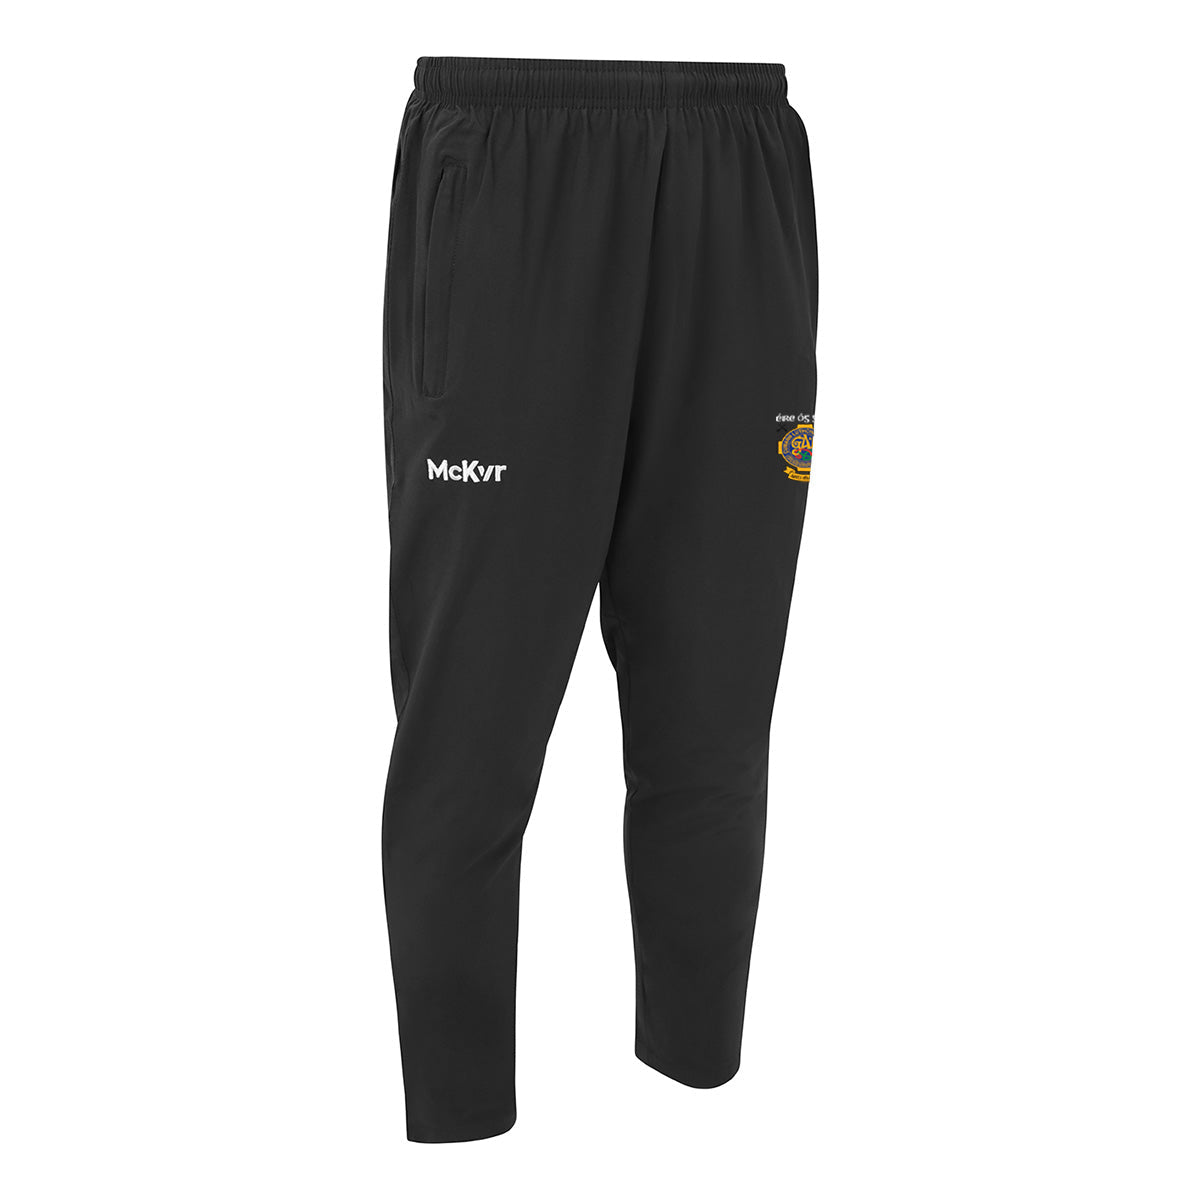 Mc Keever Eire Og GAC Craigavon Core 22 Tapered Pants - Youth - Black